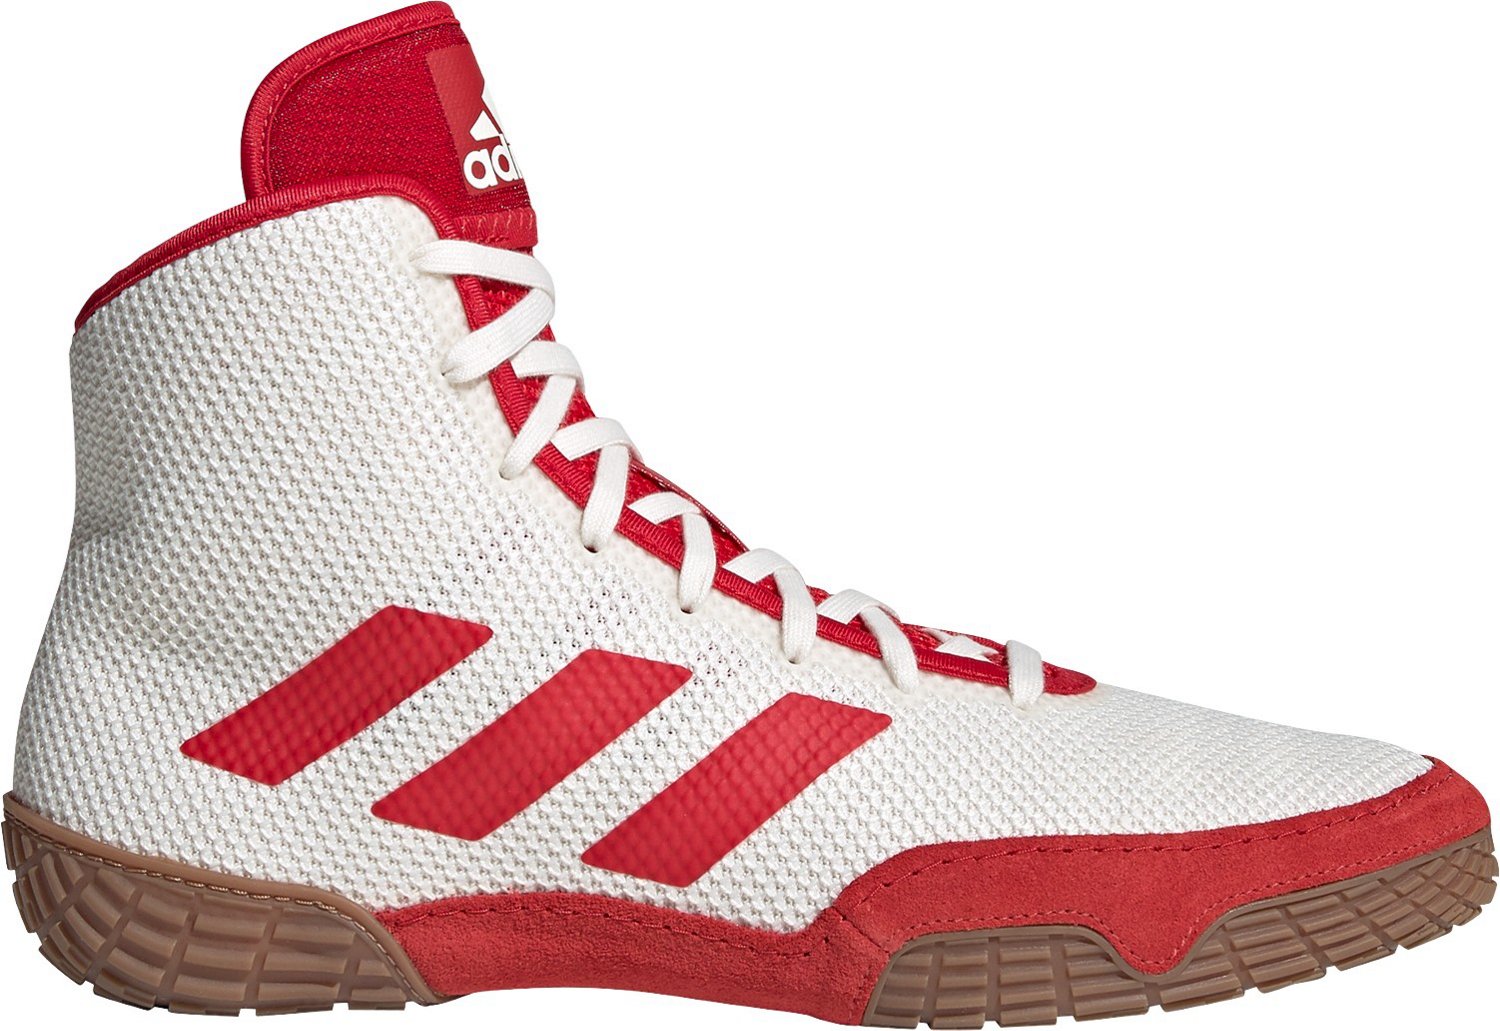 Adidas Adults' Tech Fall 2.0 Wrestling Shoes | Academy